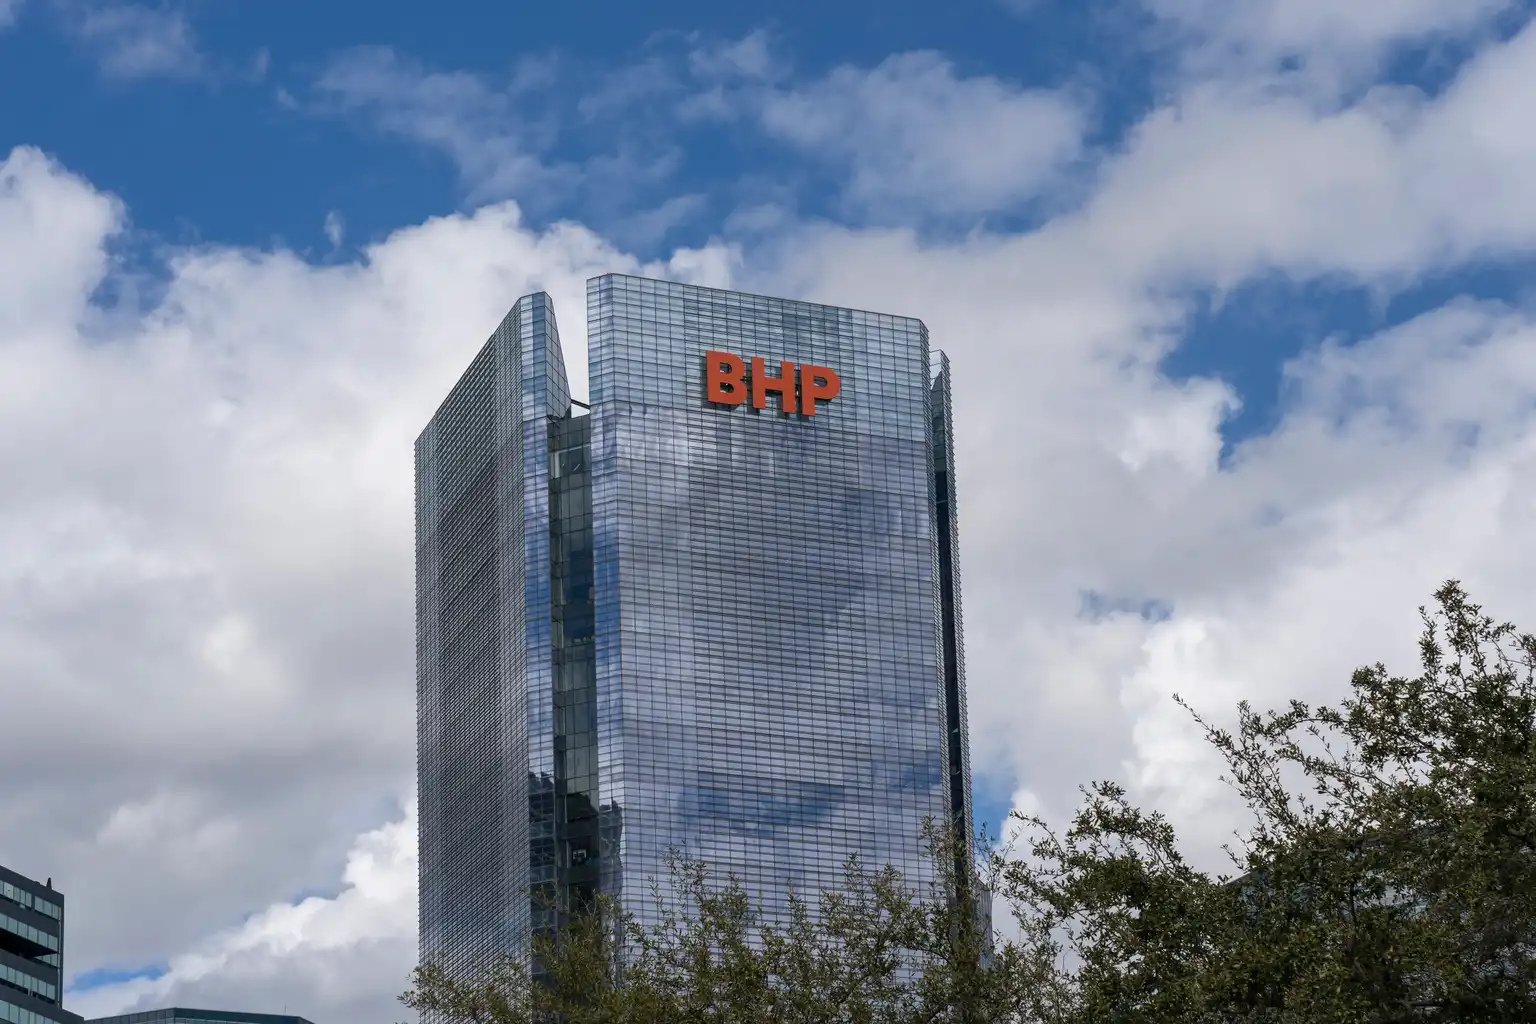 BHP Stock: Improvements Visible, But Downside Possible Too - Seeking Alpha